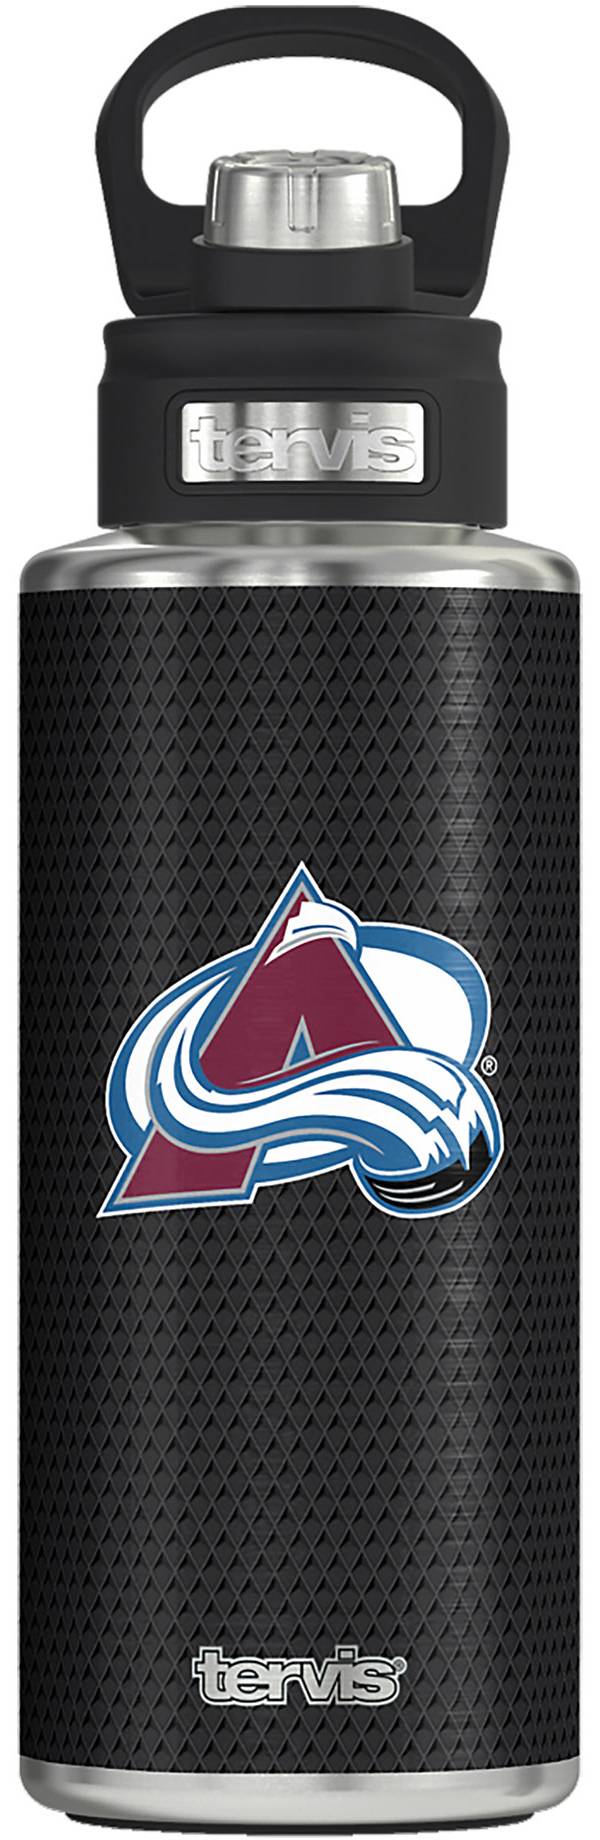 Tervis Colorado Avalanche 32oz. Water Bottle product image